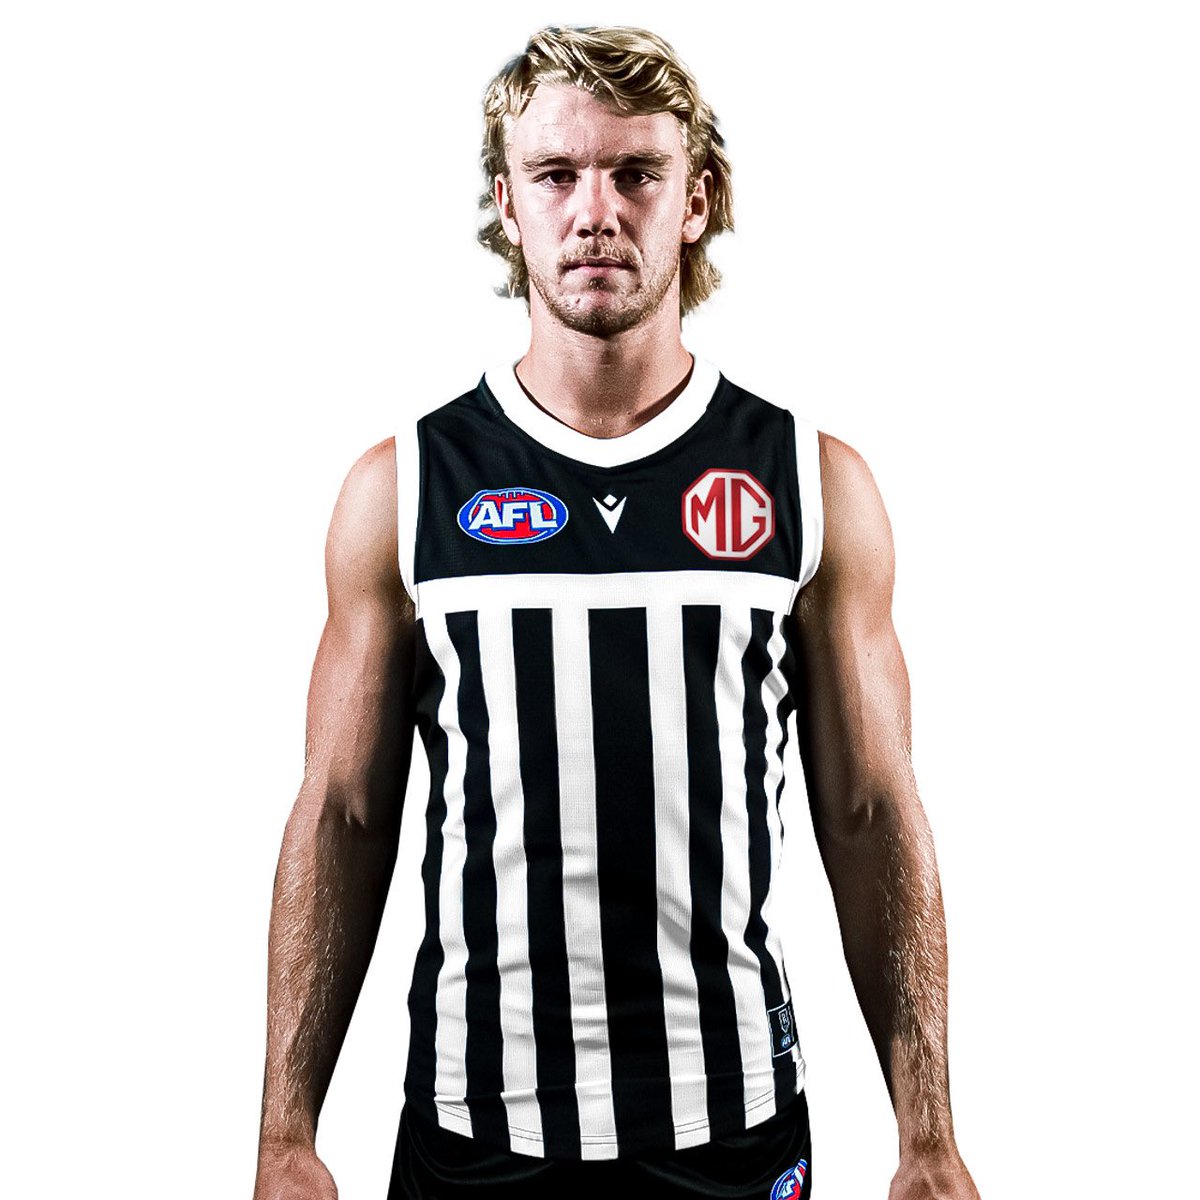 If @FC_Tasmania can wear their traditional guernsey to galvanise a supporter base - why can’t @PAFC? #hringbackthebars